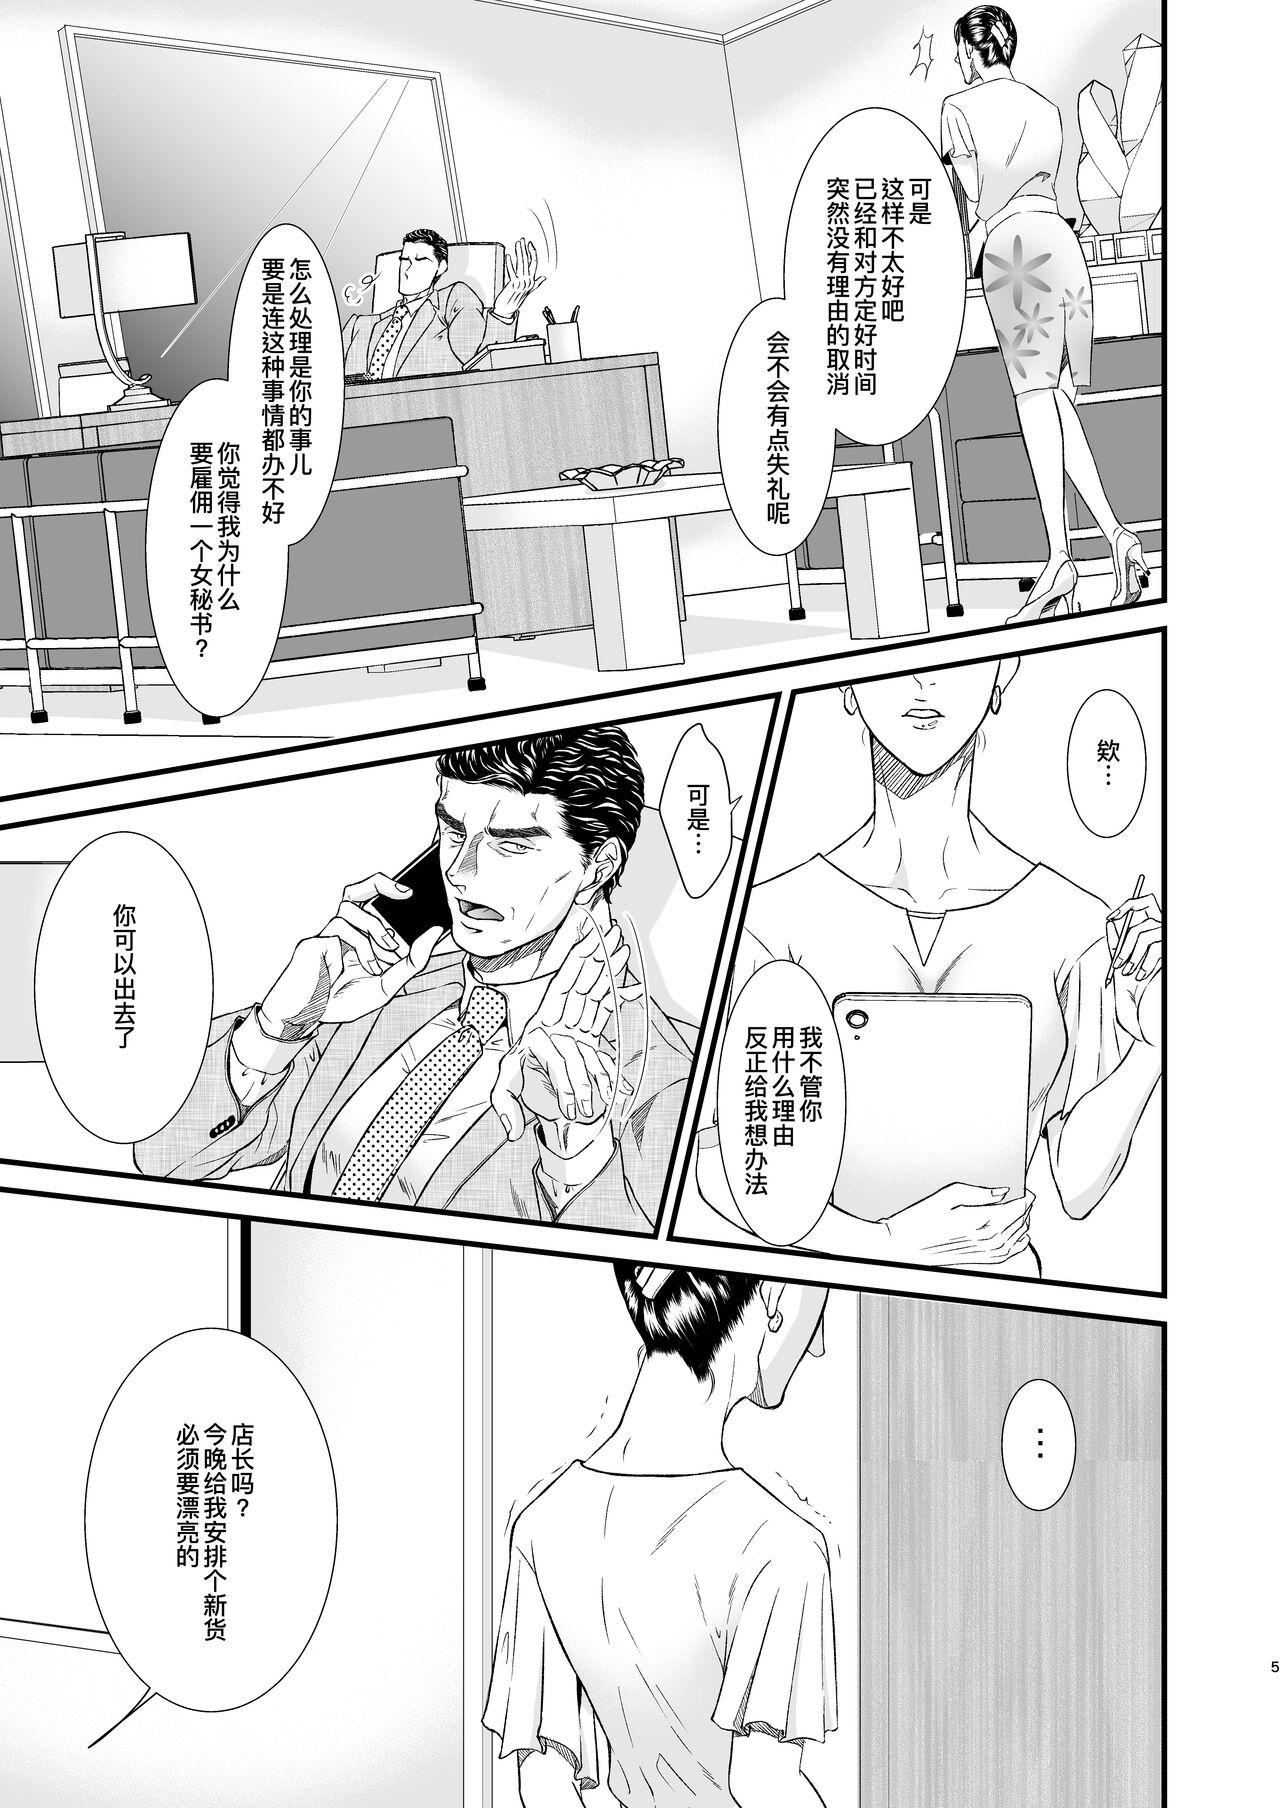 Couch PUNISHMENT 1# | 惩罚霸道总裁-第1卷 - Original Naked - Page 5